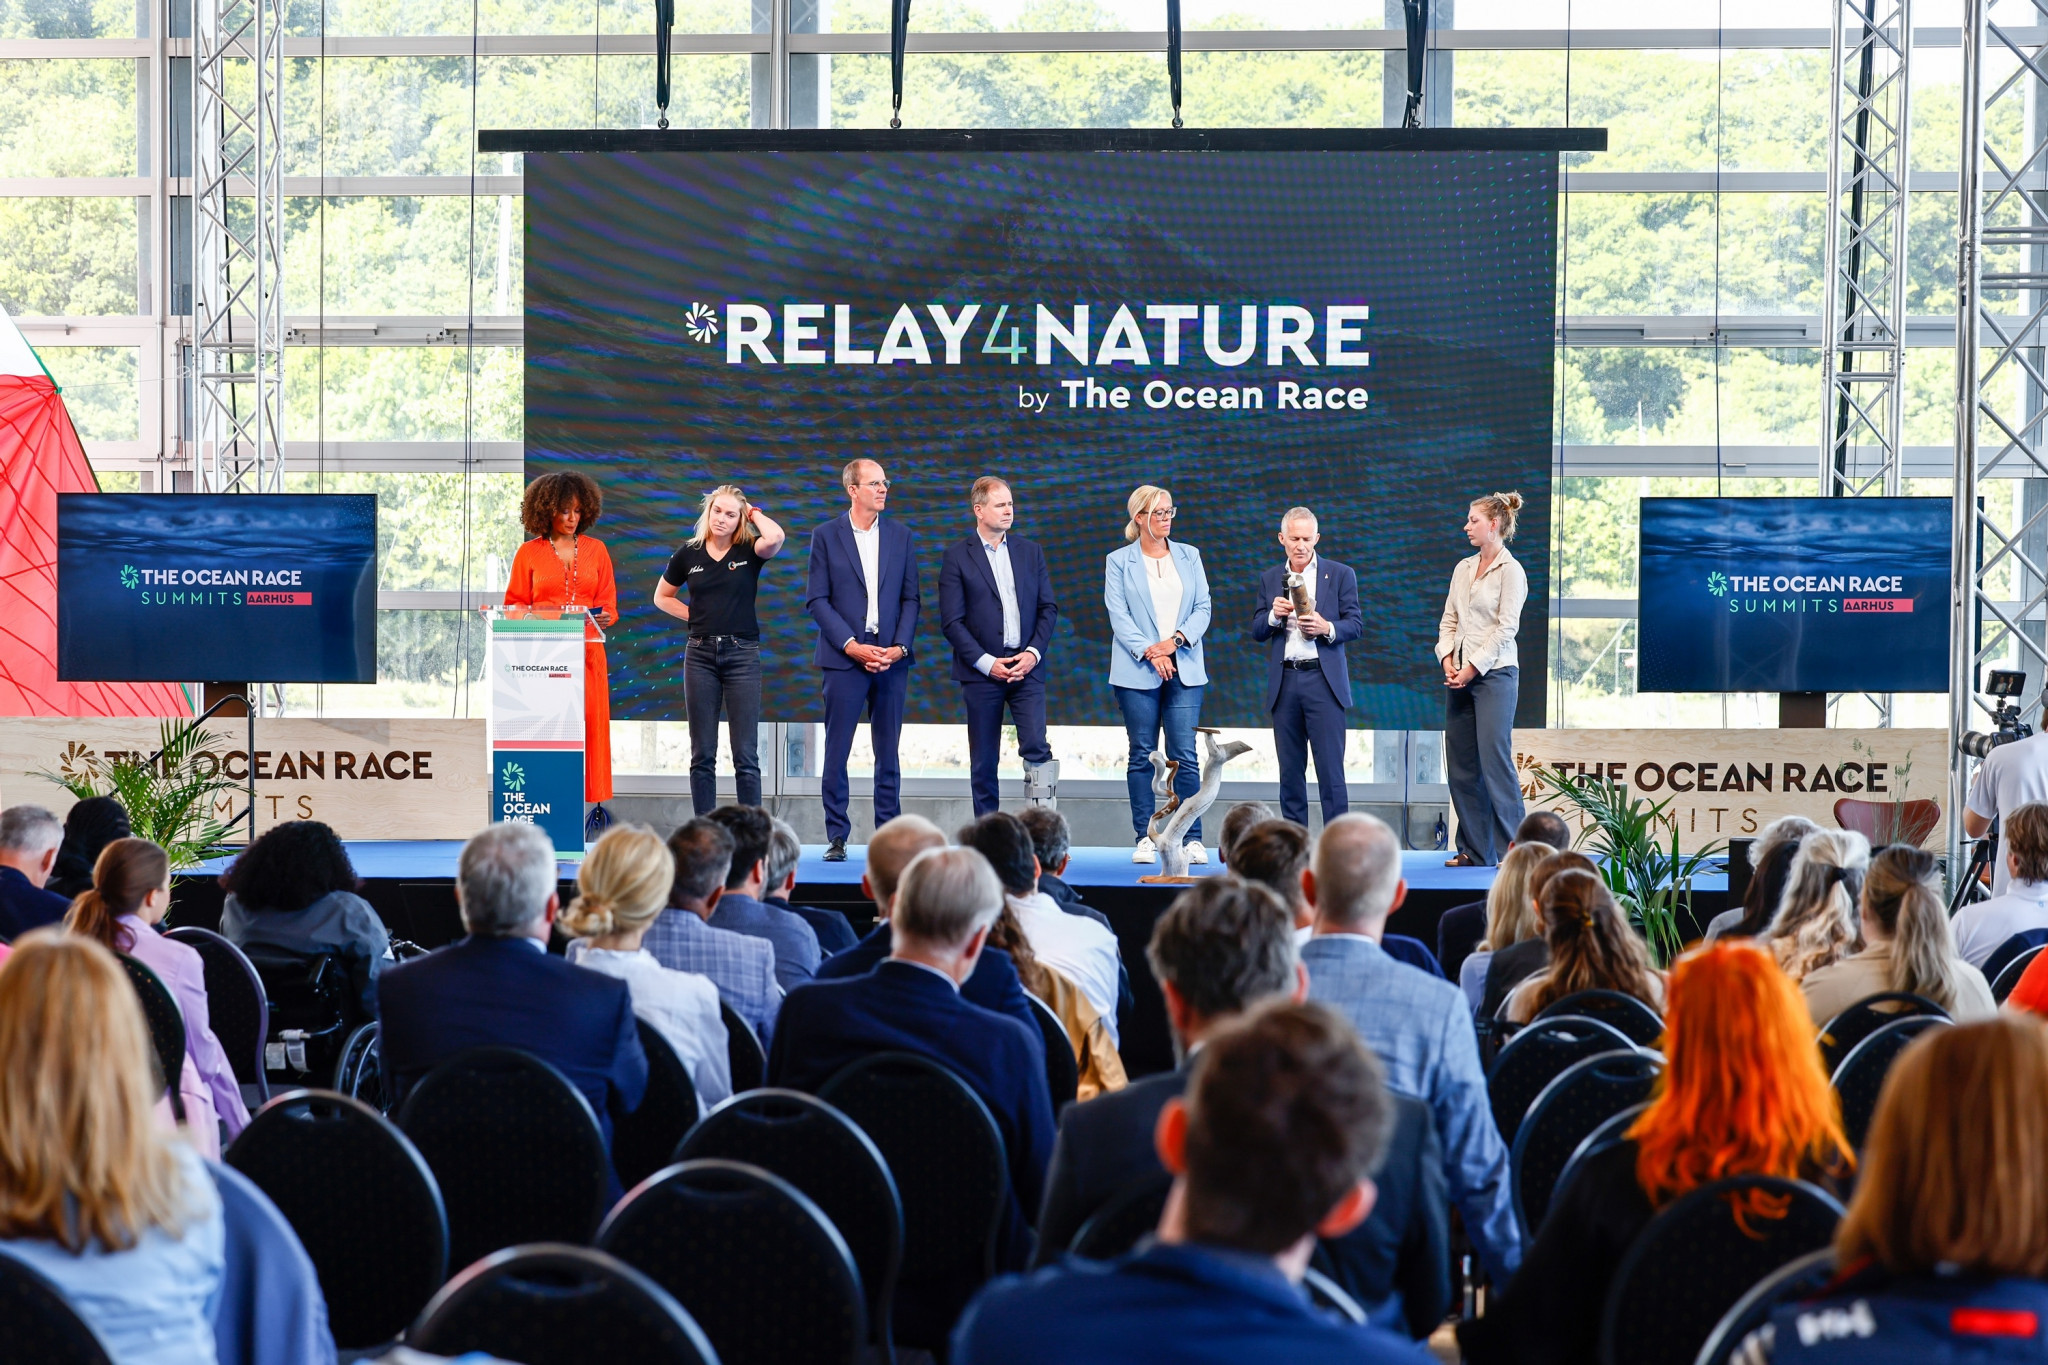 Finding ways to protect the marine life was among the topics discussed at The Ocean Race Summit ©Sailing Energy/The Ocean Race